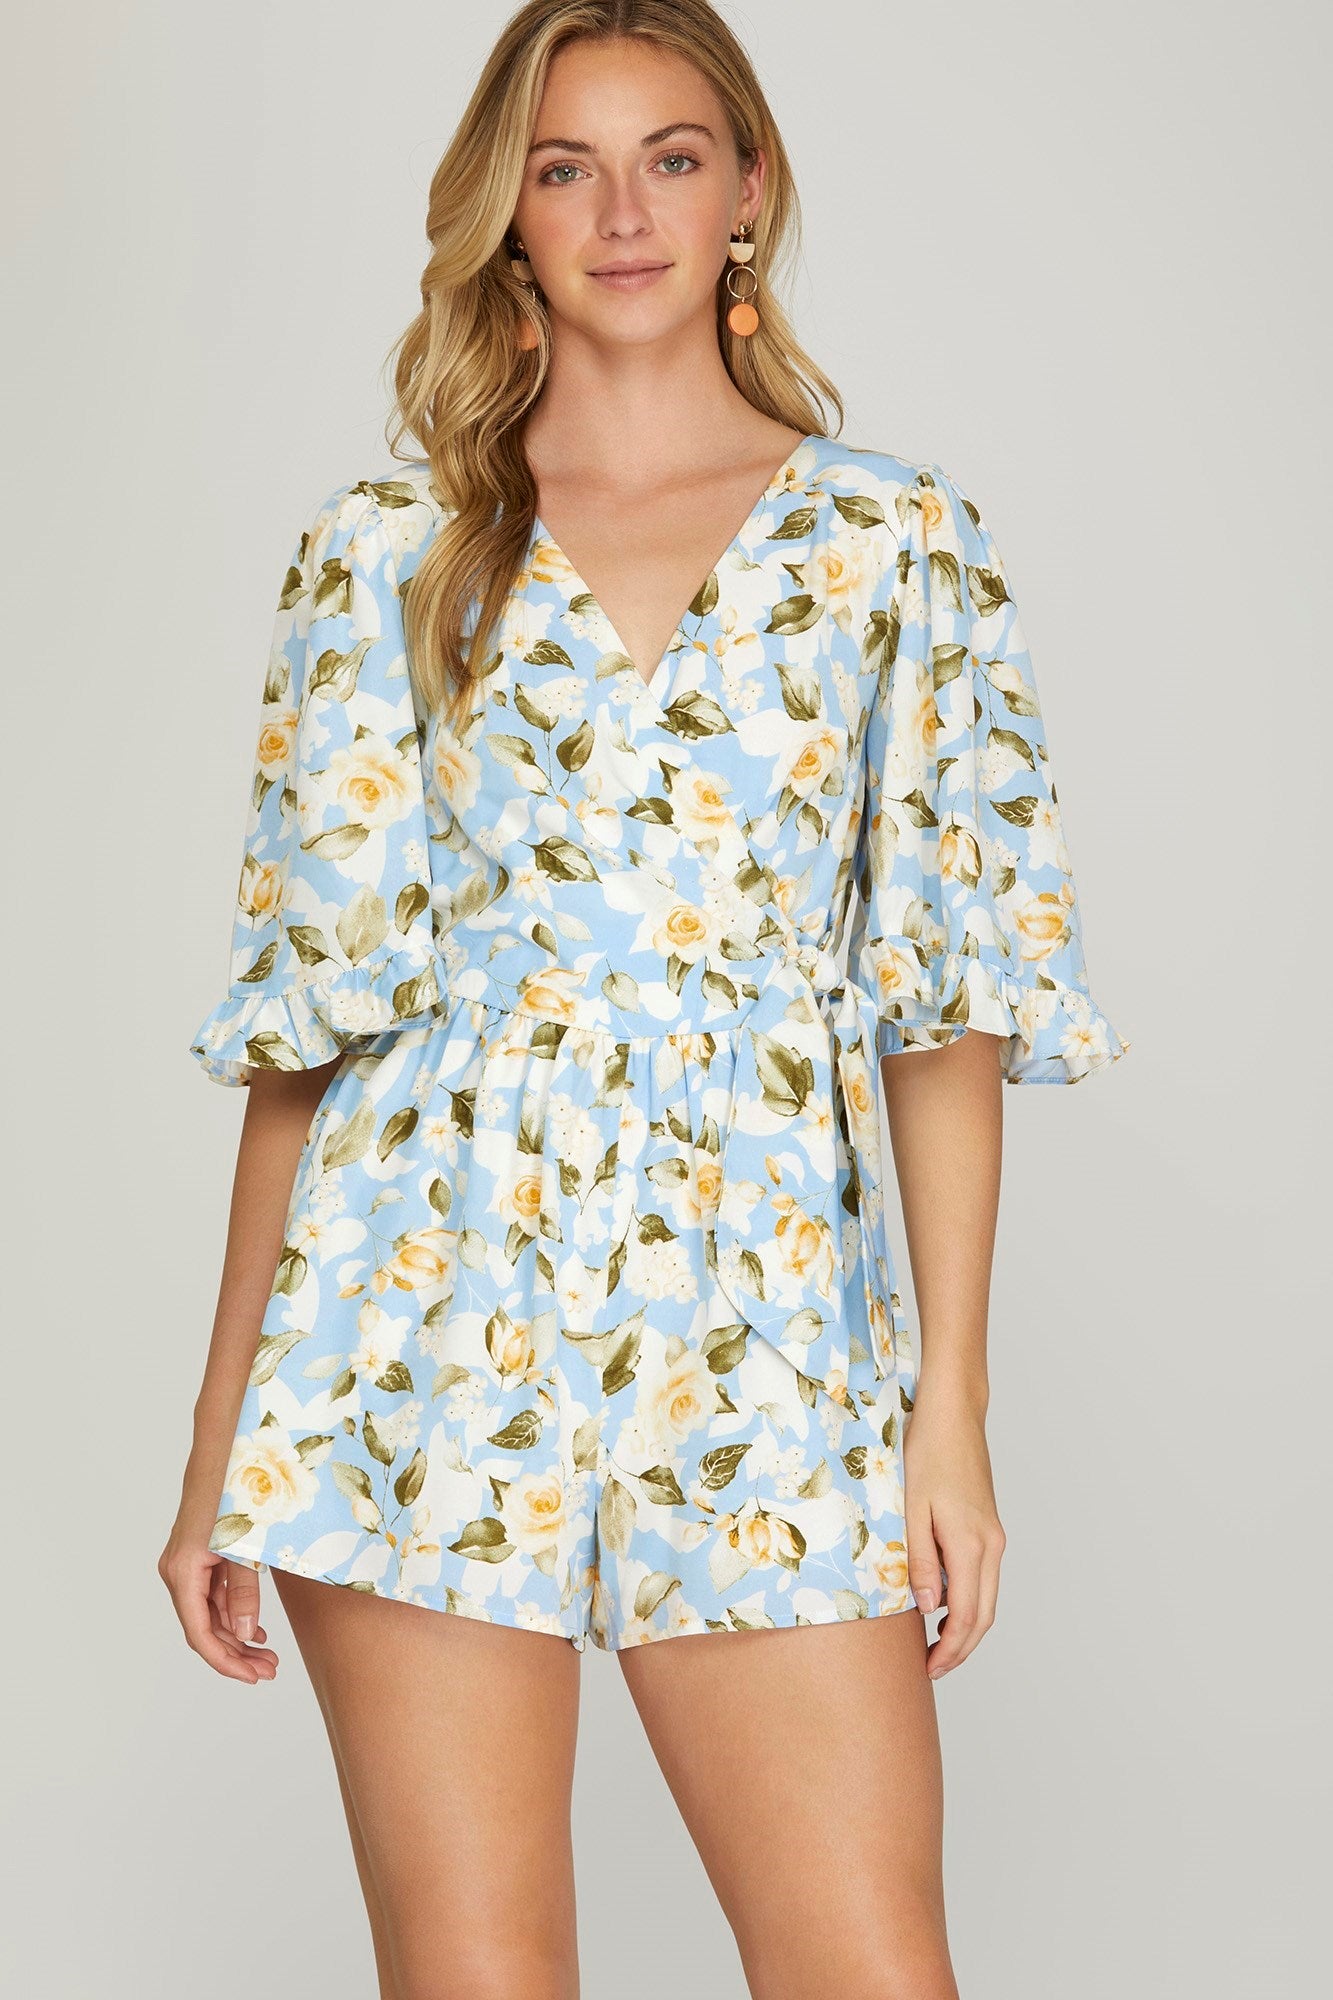 The Rosy Blue Romper